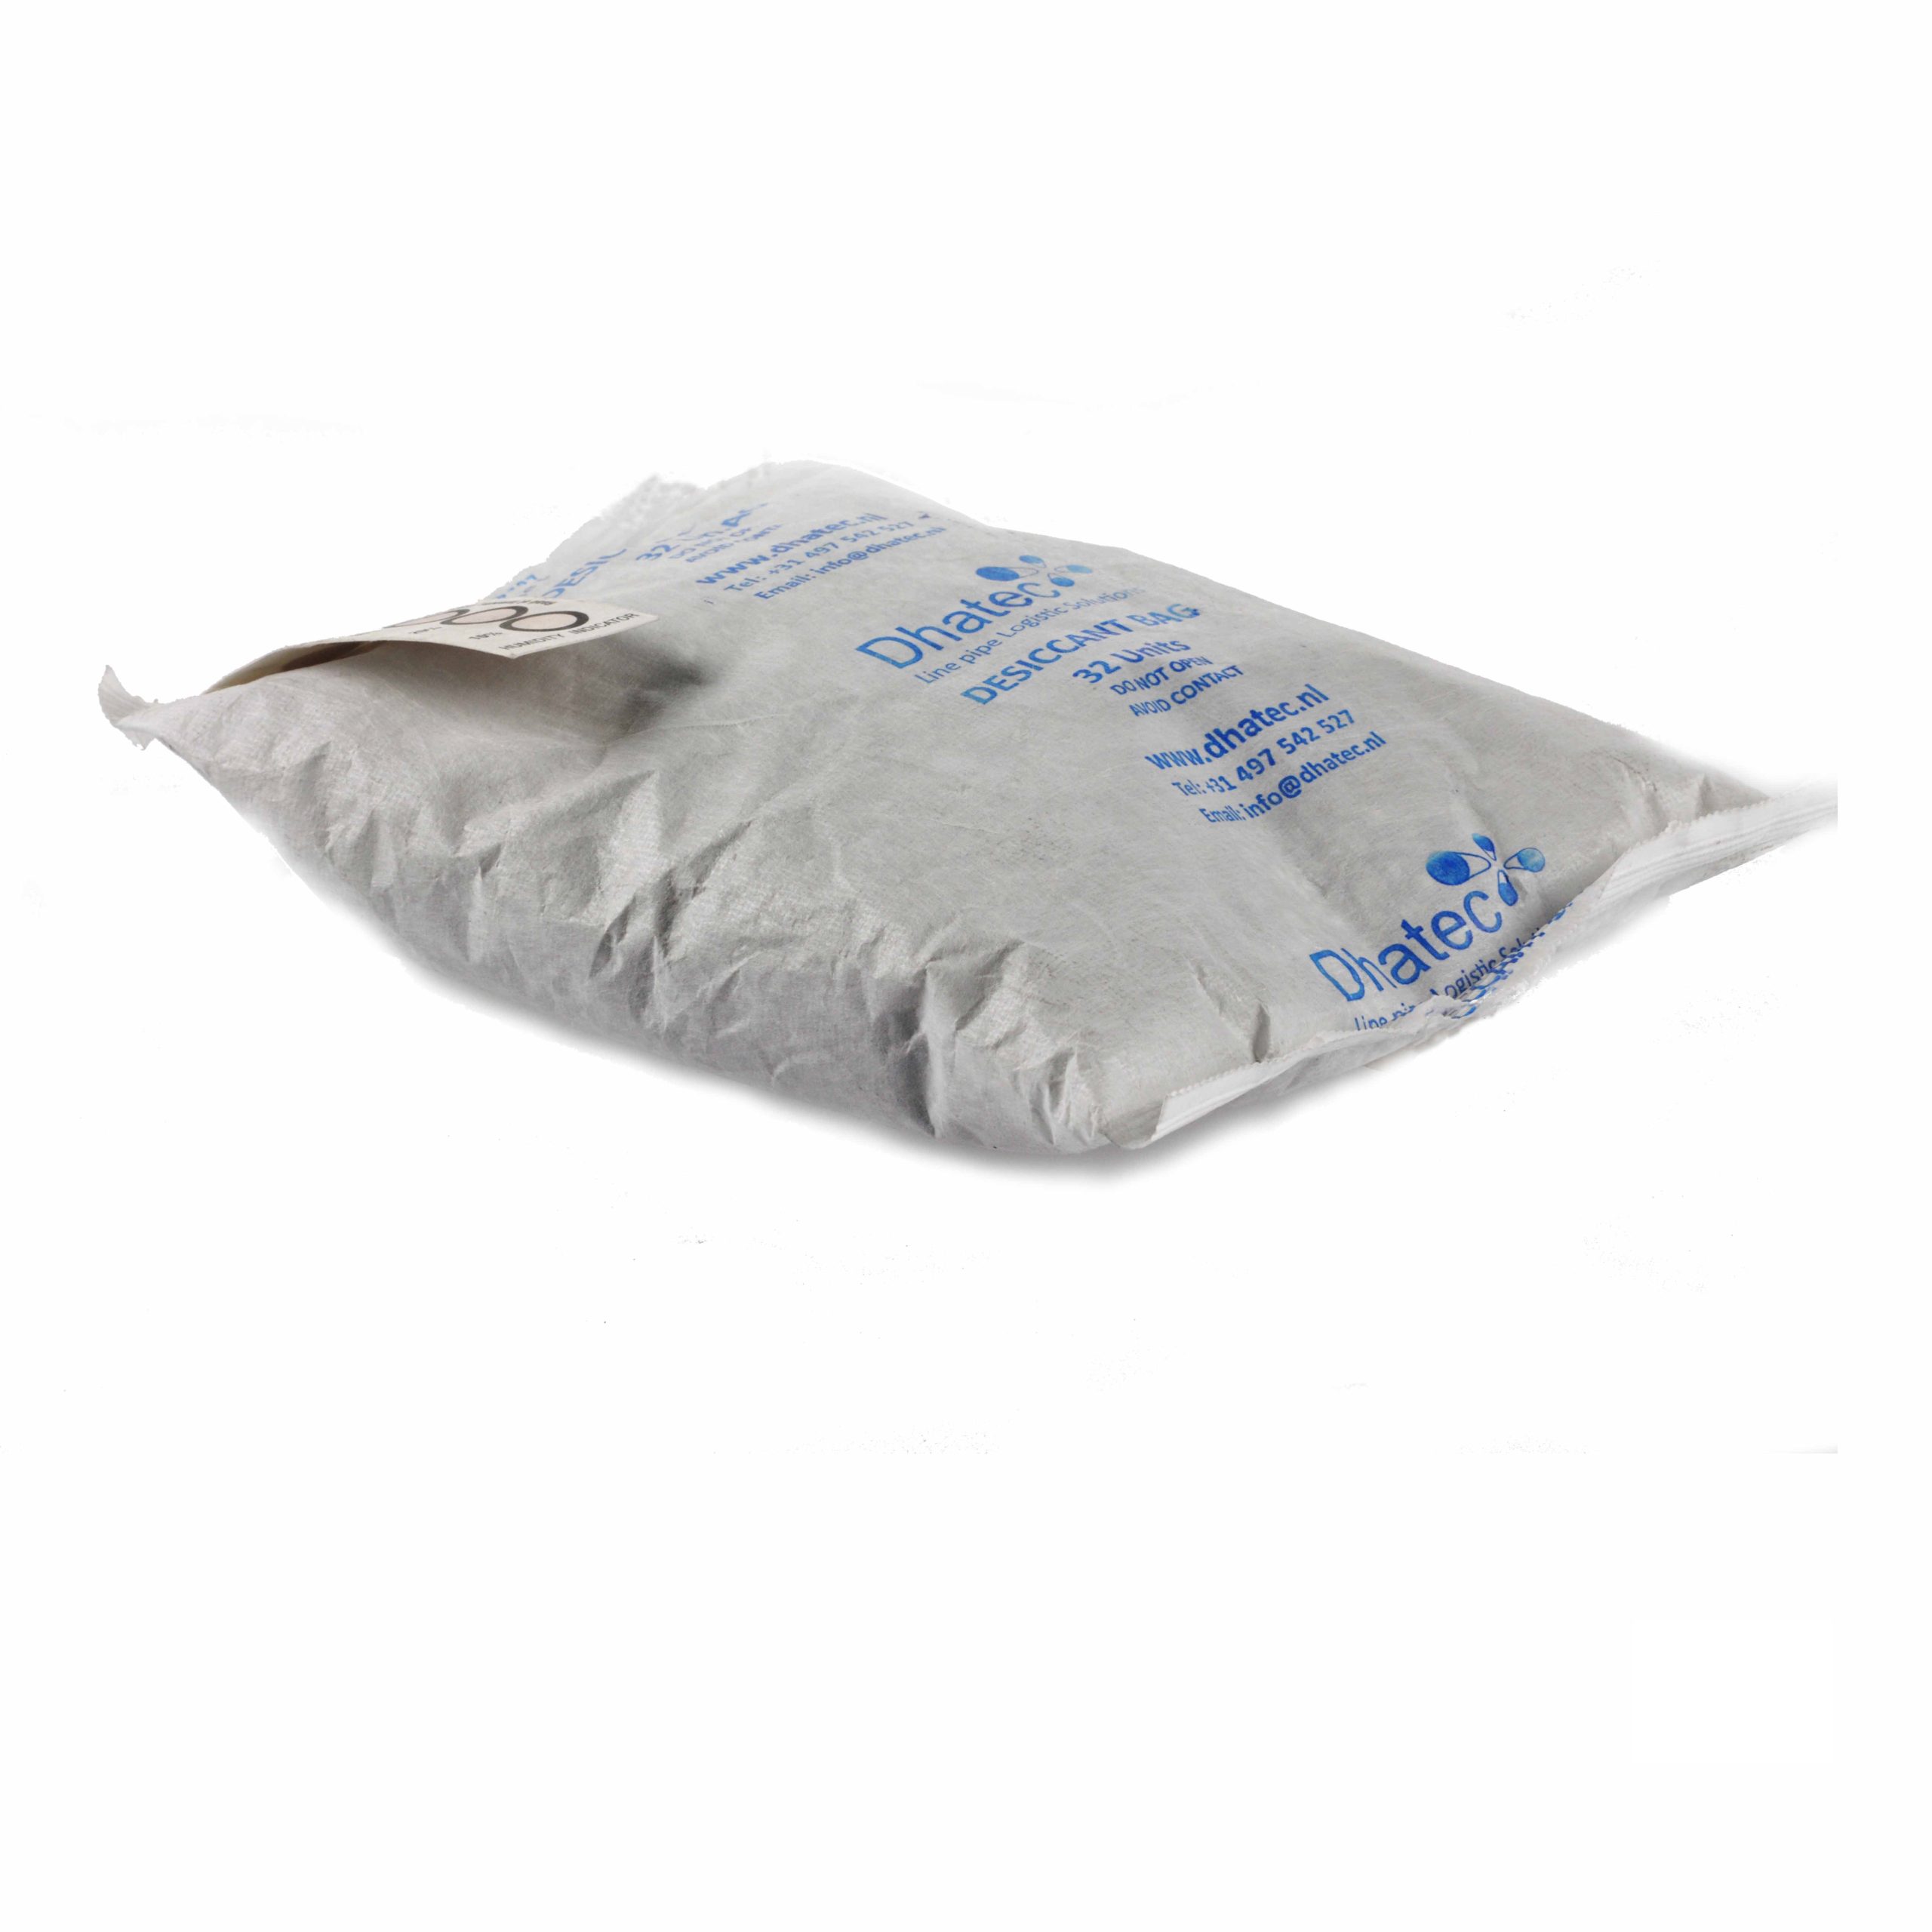 Silica Gel Humid Dry Silica Gel Bag Small Desiccant Packets for Closet -  China Silica Gel Without Cobalt, Various Color Silica Gel Desiccant |  Made-in-China.com